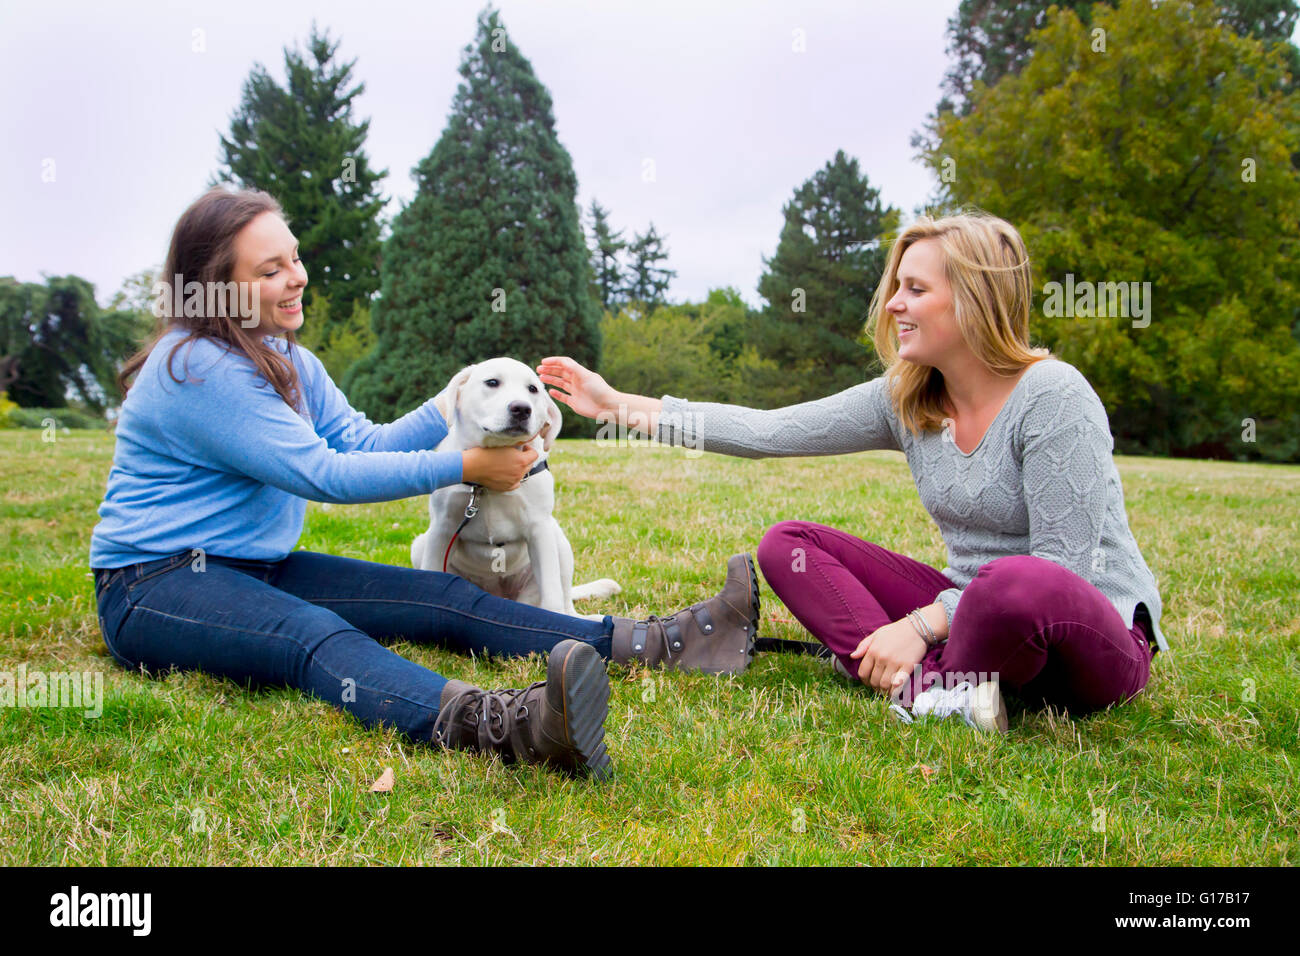 Two young women playing with dog in park Stock Photo